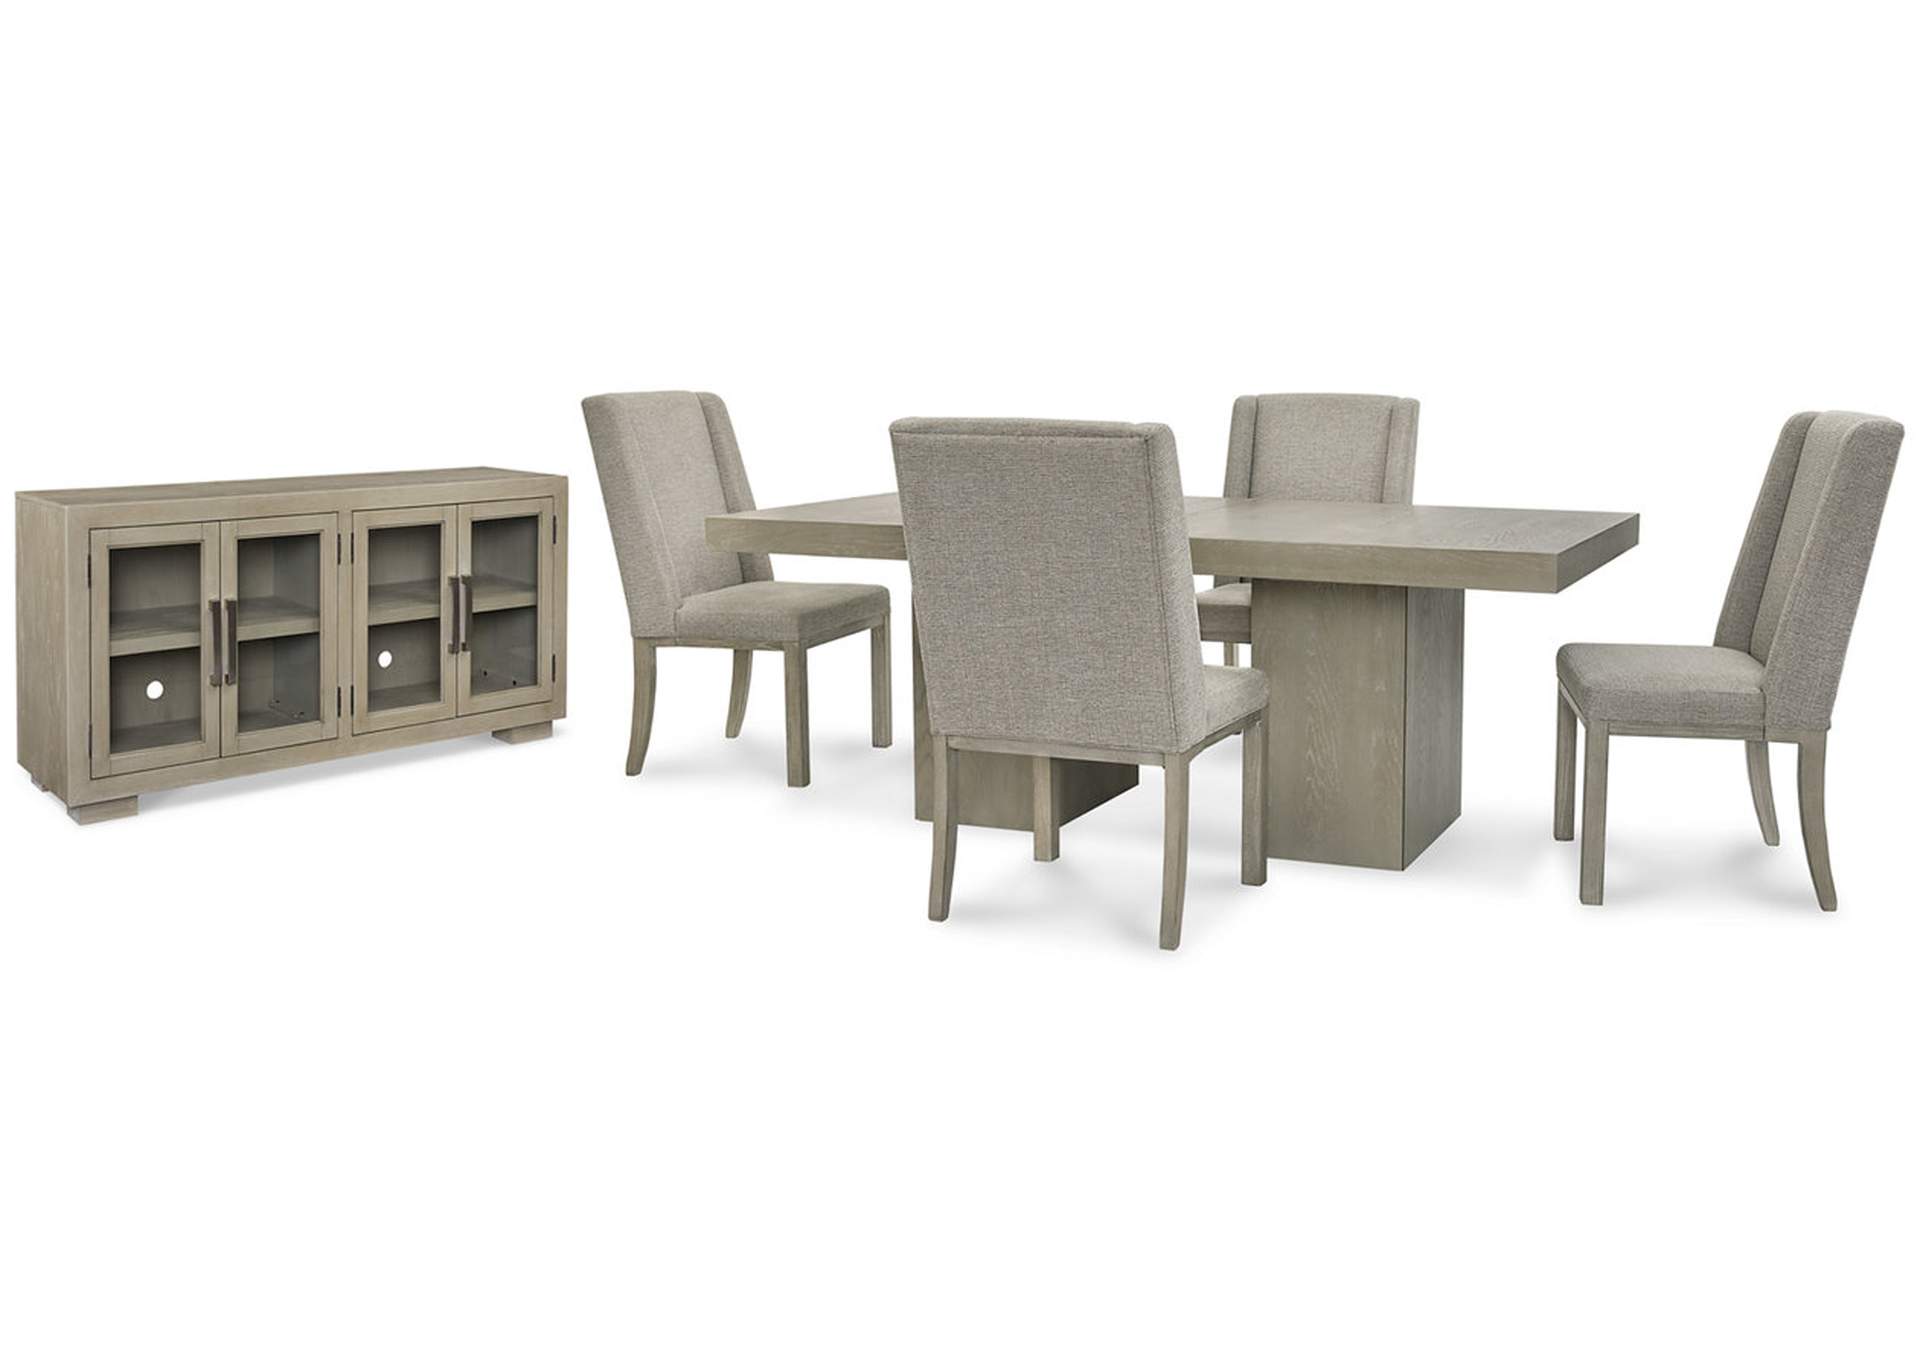 Fawnburg Dining Table and 4 Chairs with Storage,Millennium